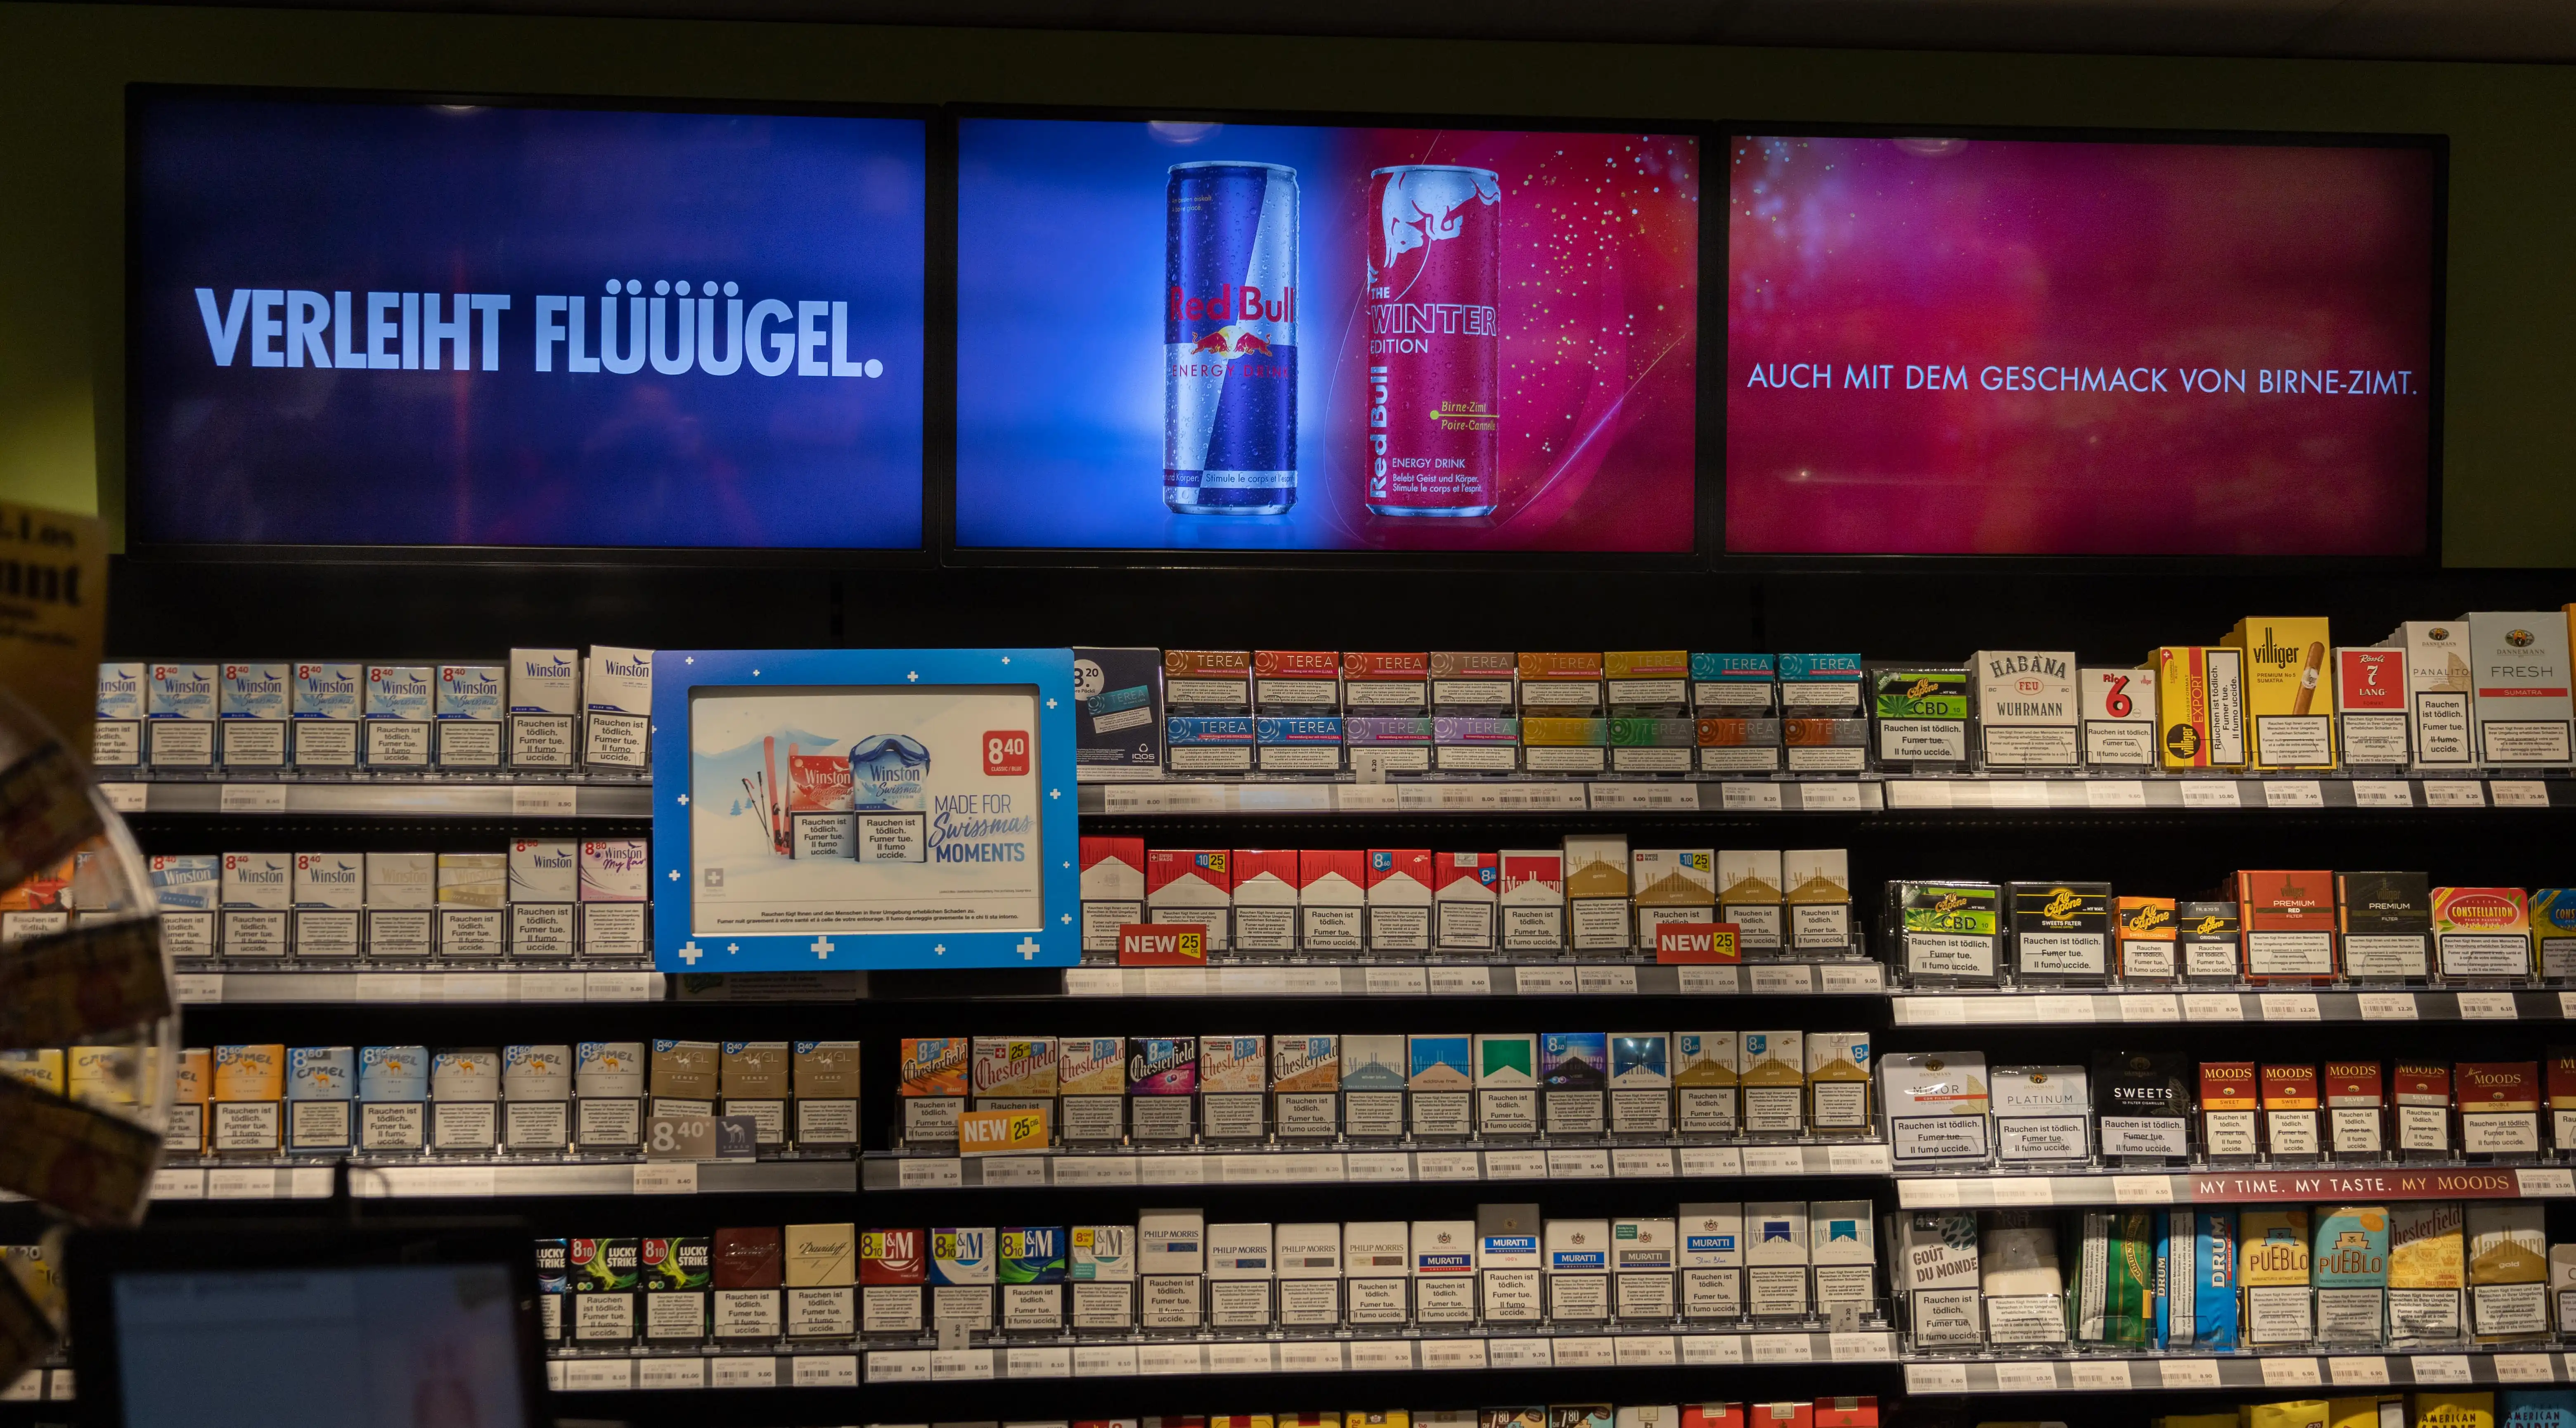 Redbull content on digital signage checkout module above tobacco offer